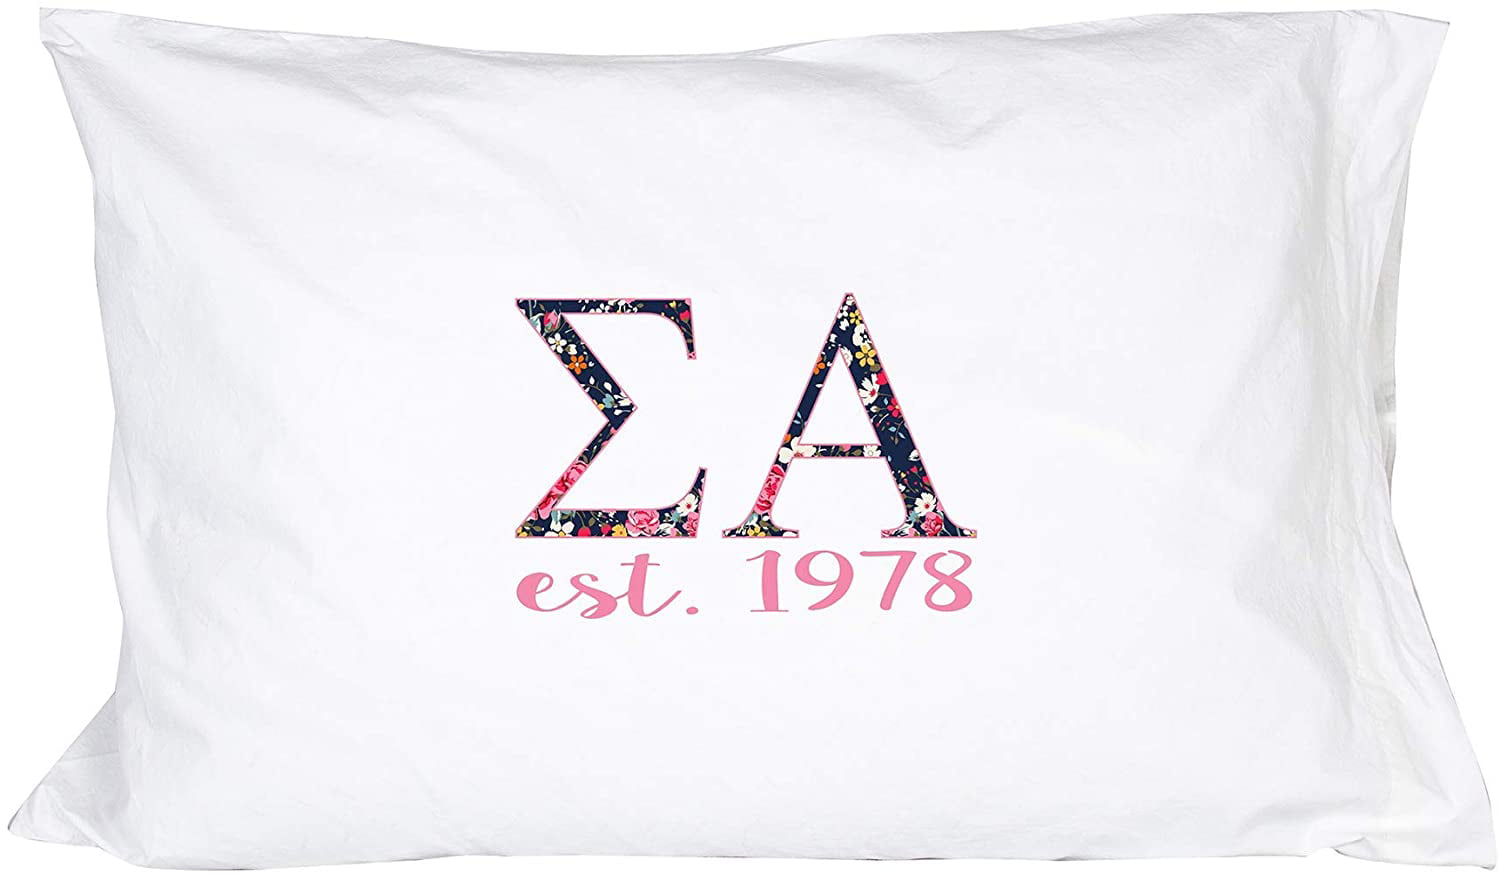 Sigma Sigma Sigma Tri-Sigma Floral Letters with Founding Year Pillowcase 